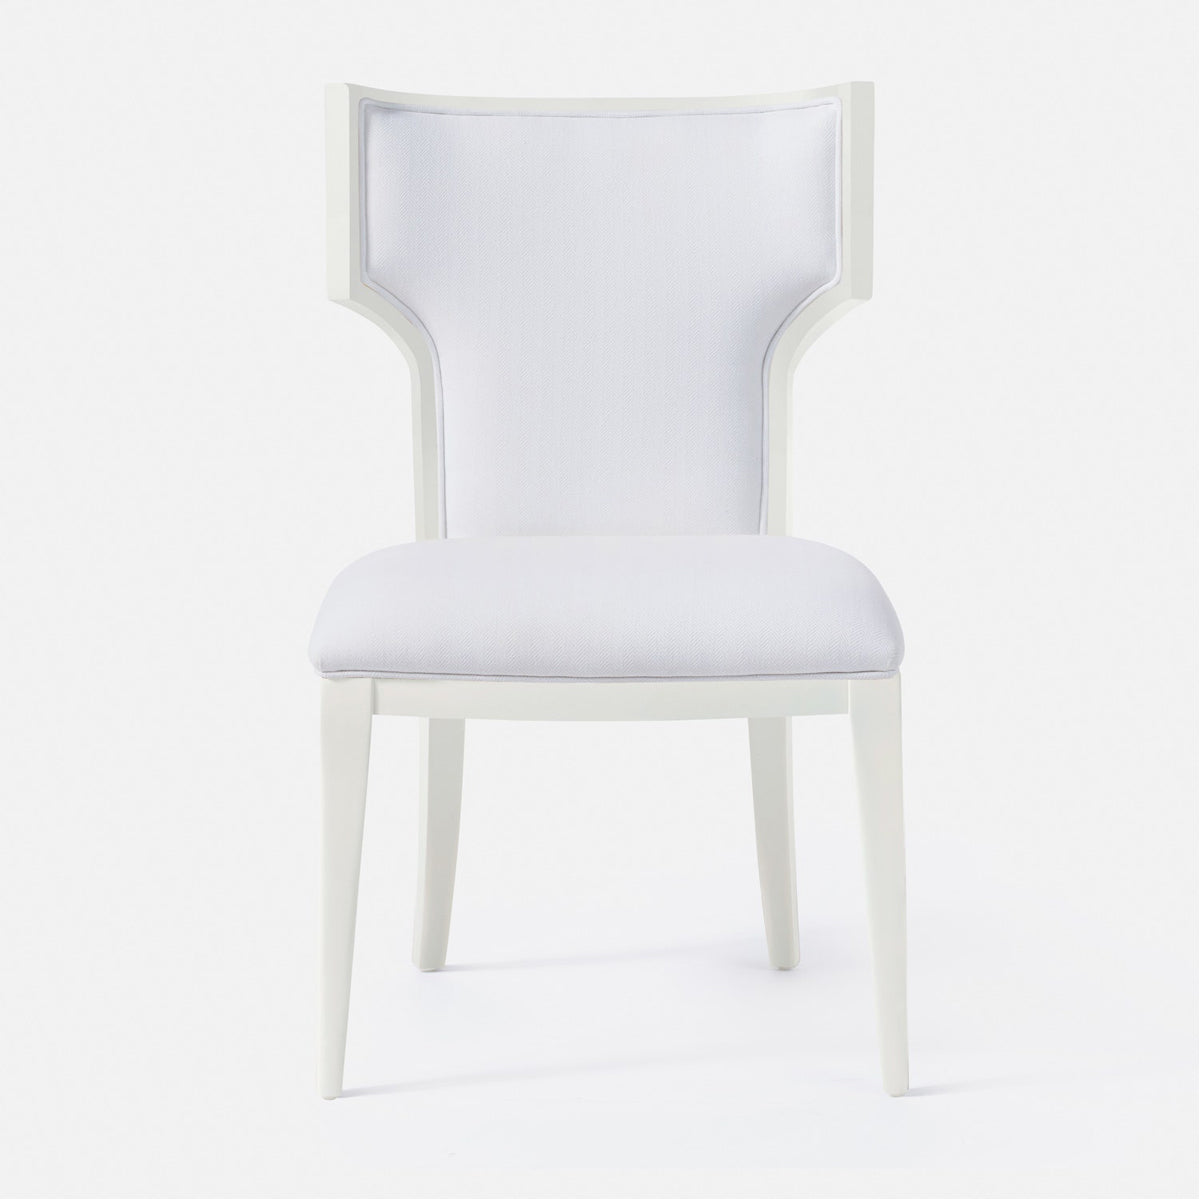 Made Goods Carleen Wingback Dining Chair in Nile Fabric